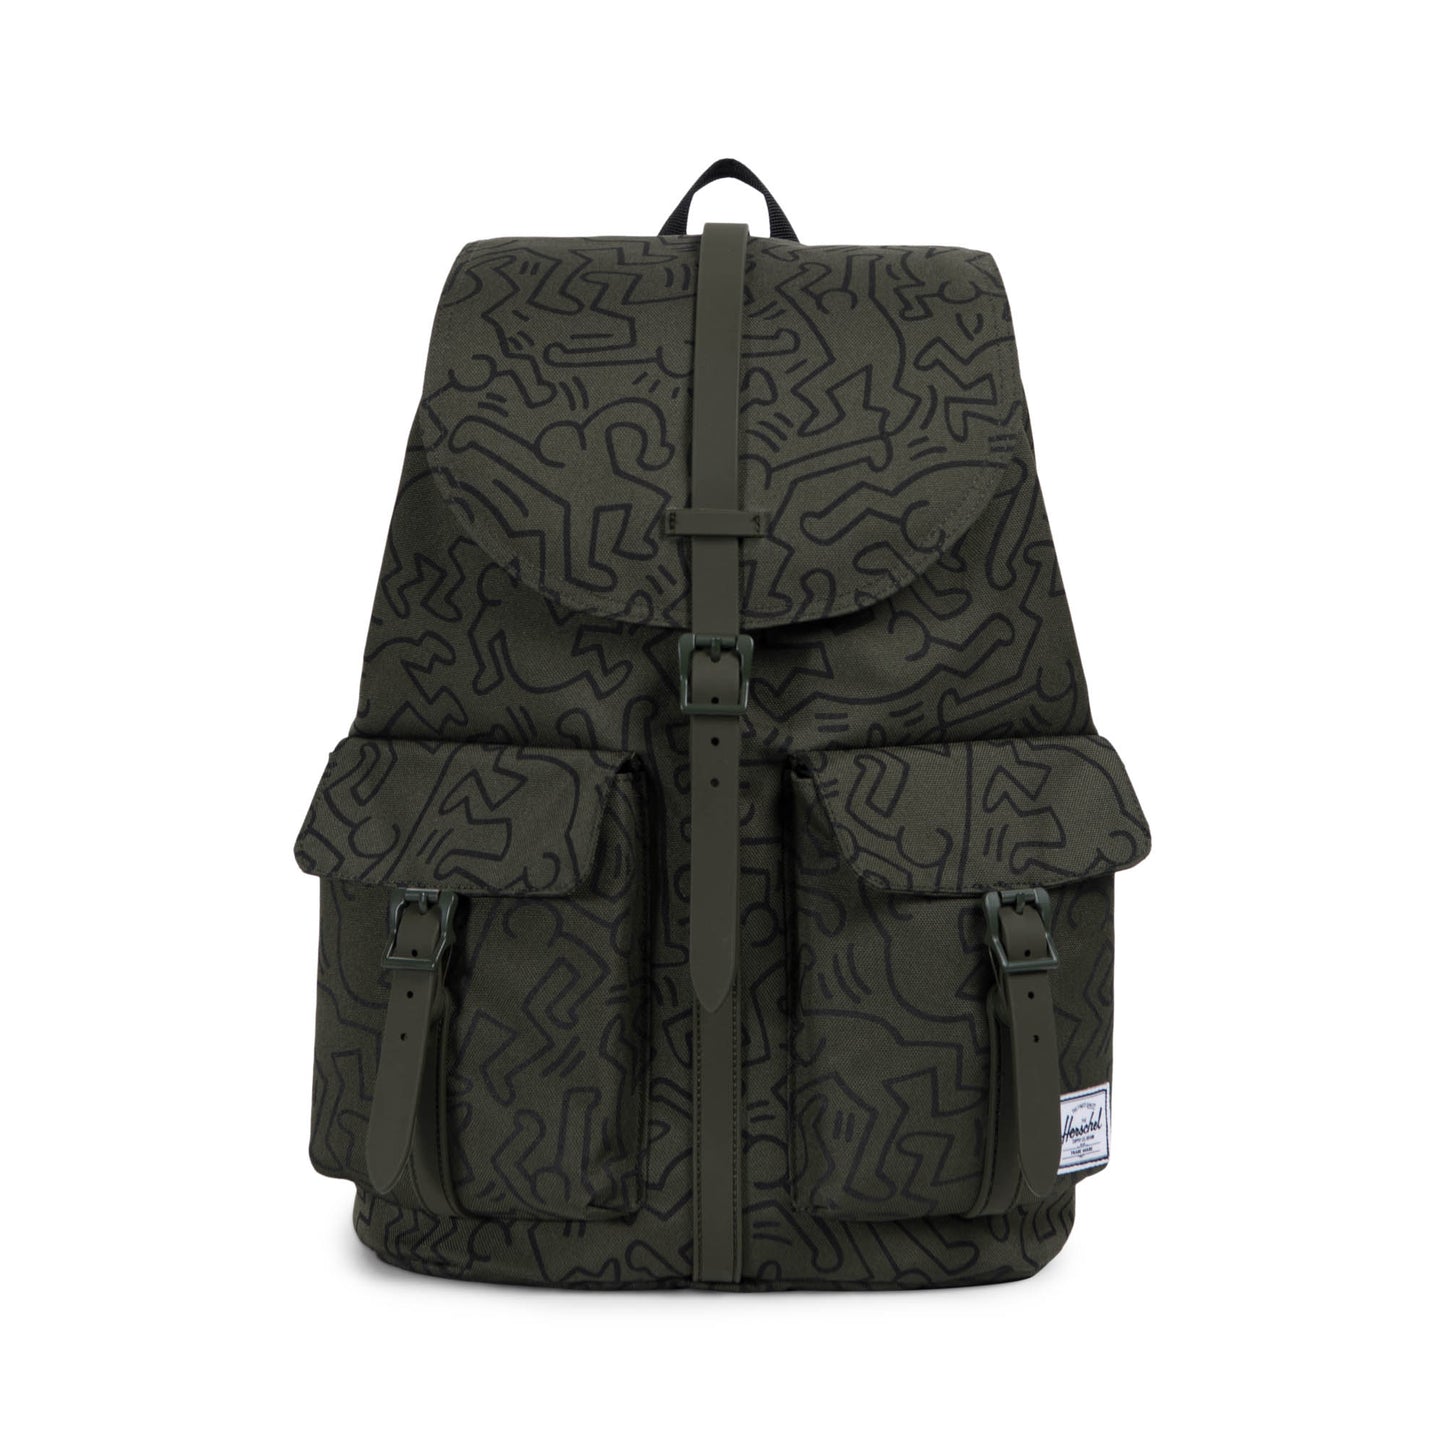 Herschel Supply Co. x Keith Haring - Dawson Backpack, Forest Night - The Giant Peach